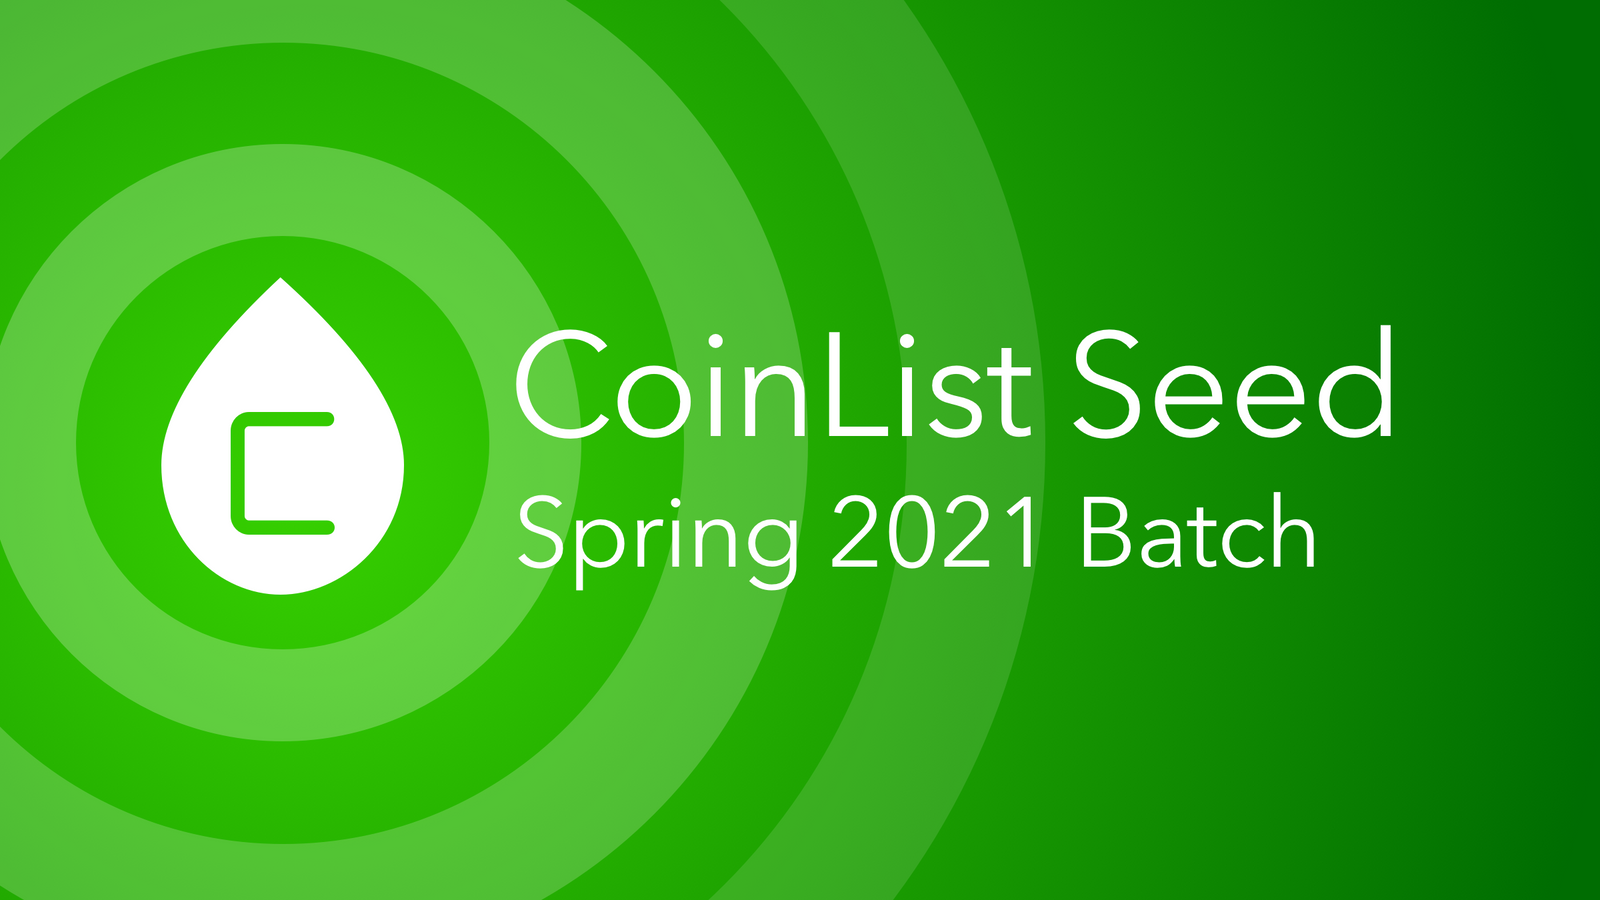 Introducing the CoinList Seed Spring 2021 Batch